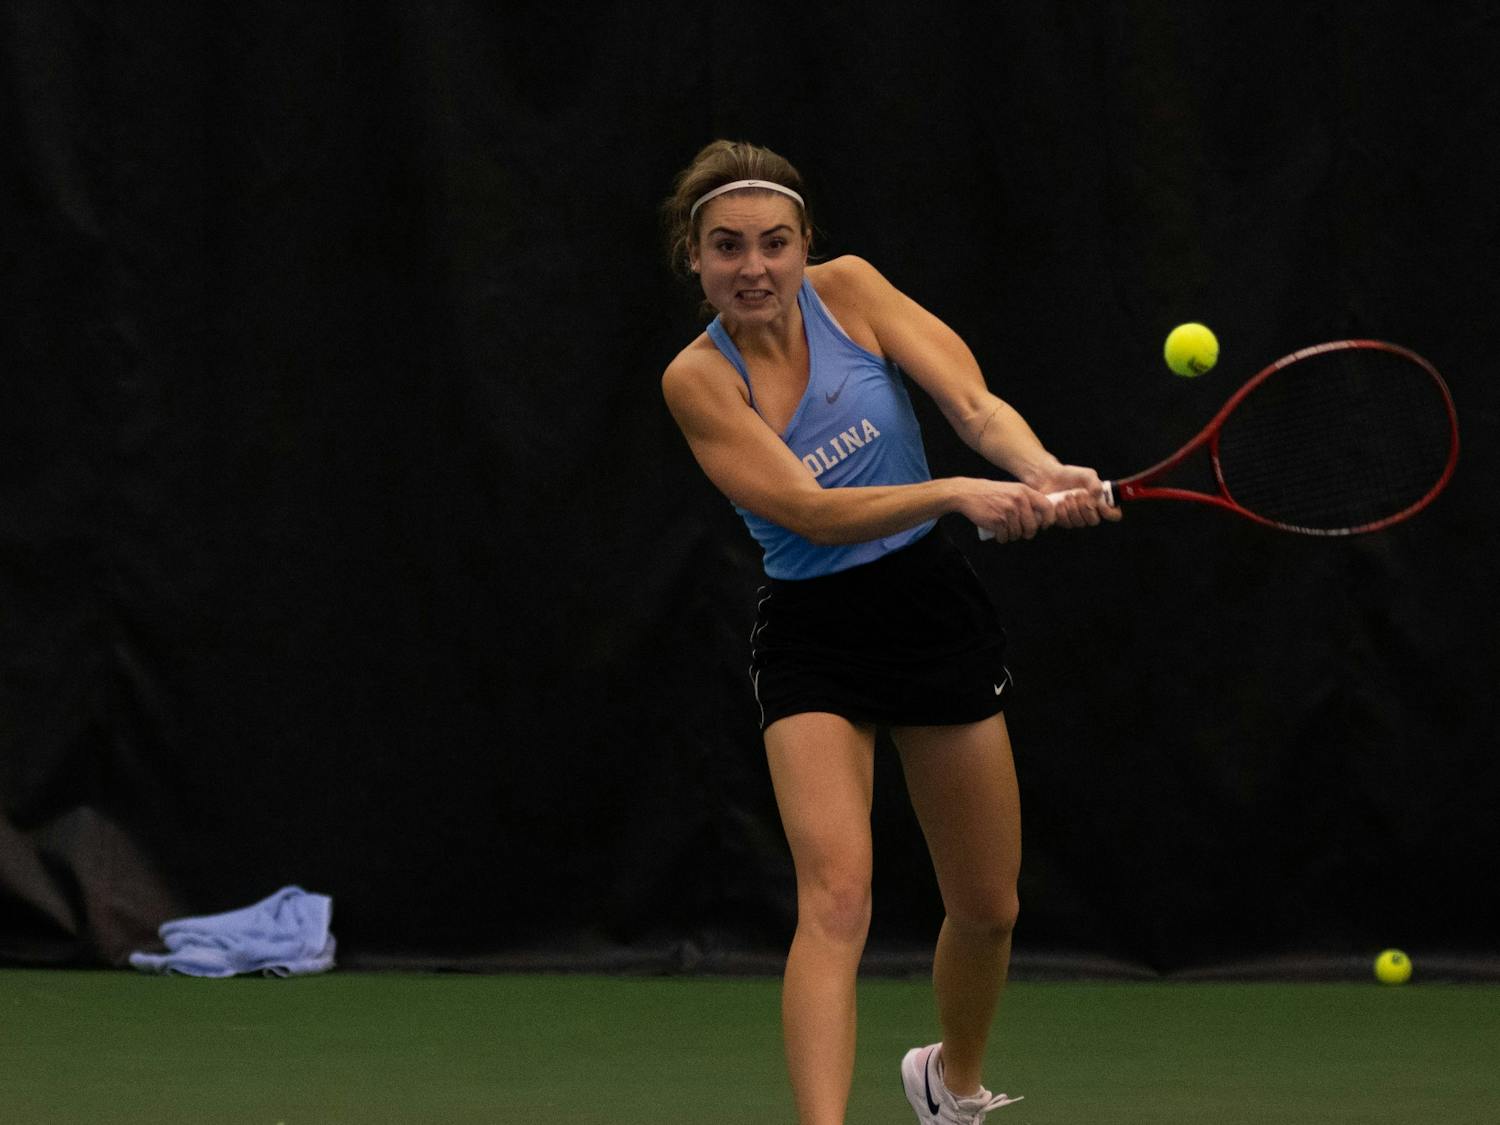 Fiona Crawley hits the ball during her singles match against Elon University's Lizette Reding on Saturday, Jan. 15, 2022, in Chapel Hill, NC.